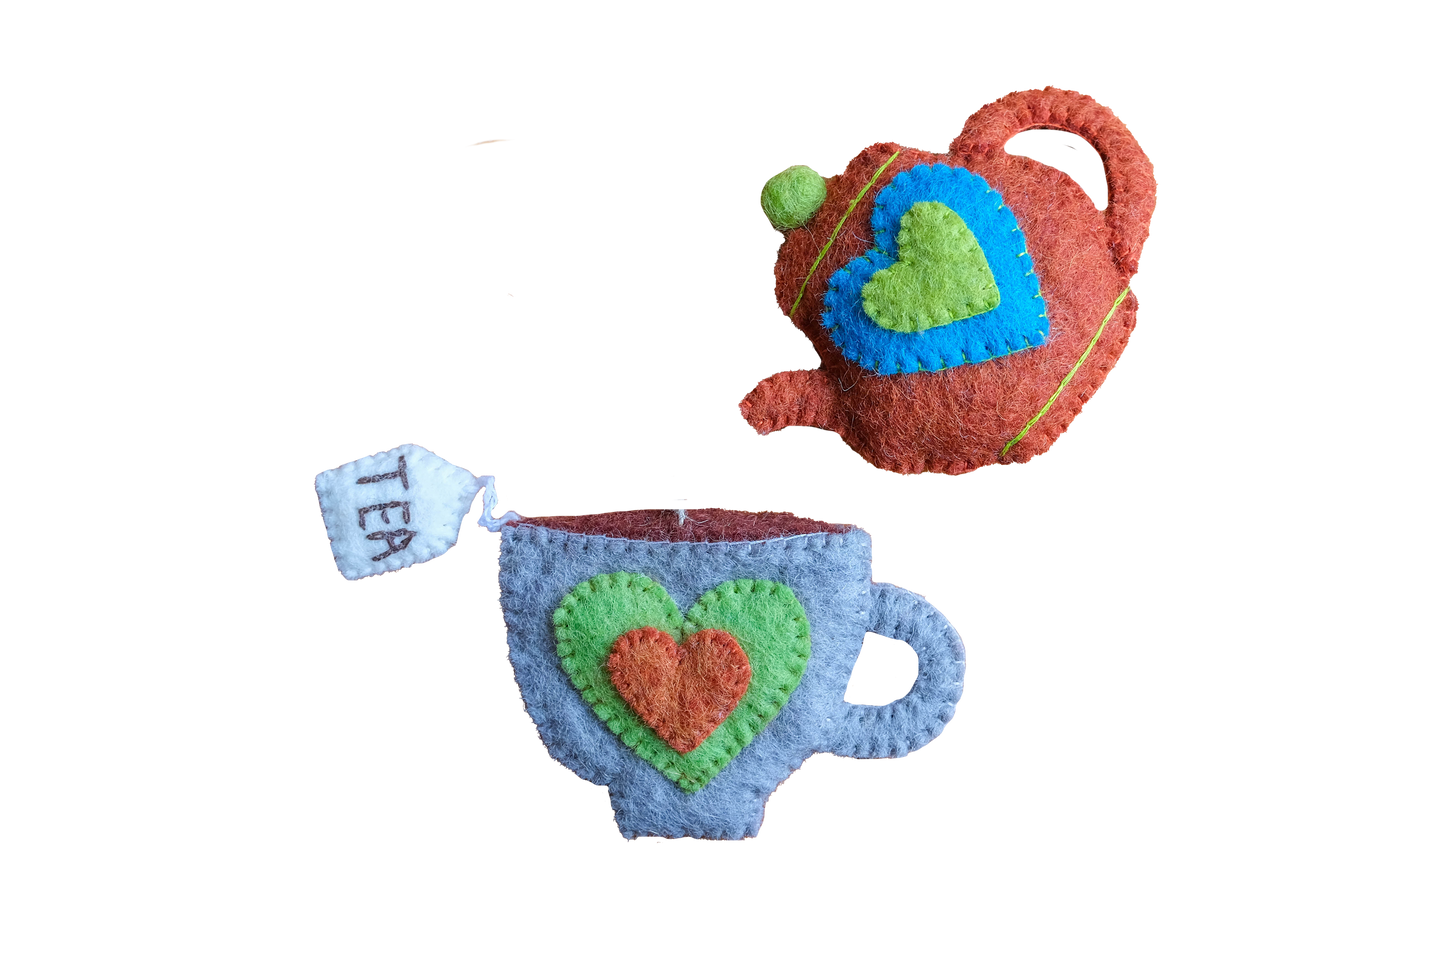 This Global Groove Life, handmade, ethical, fair trade, eco-friendly, sustainable, New Zealand wool felt, grey, blue, cinnamon & green heart teapot and teacup ornament set was created by artisans in Kathmandu Nepal and will bring colorful warmth and fun to your Christmas tree this season.